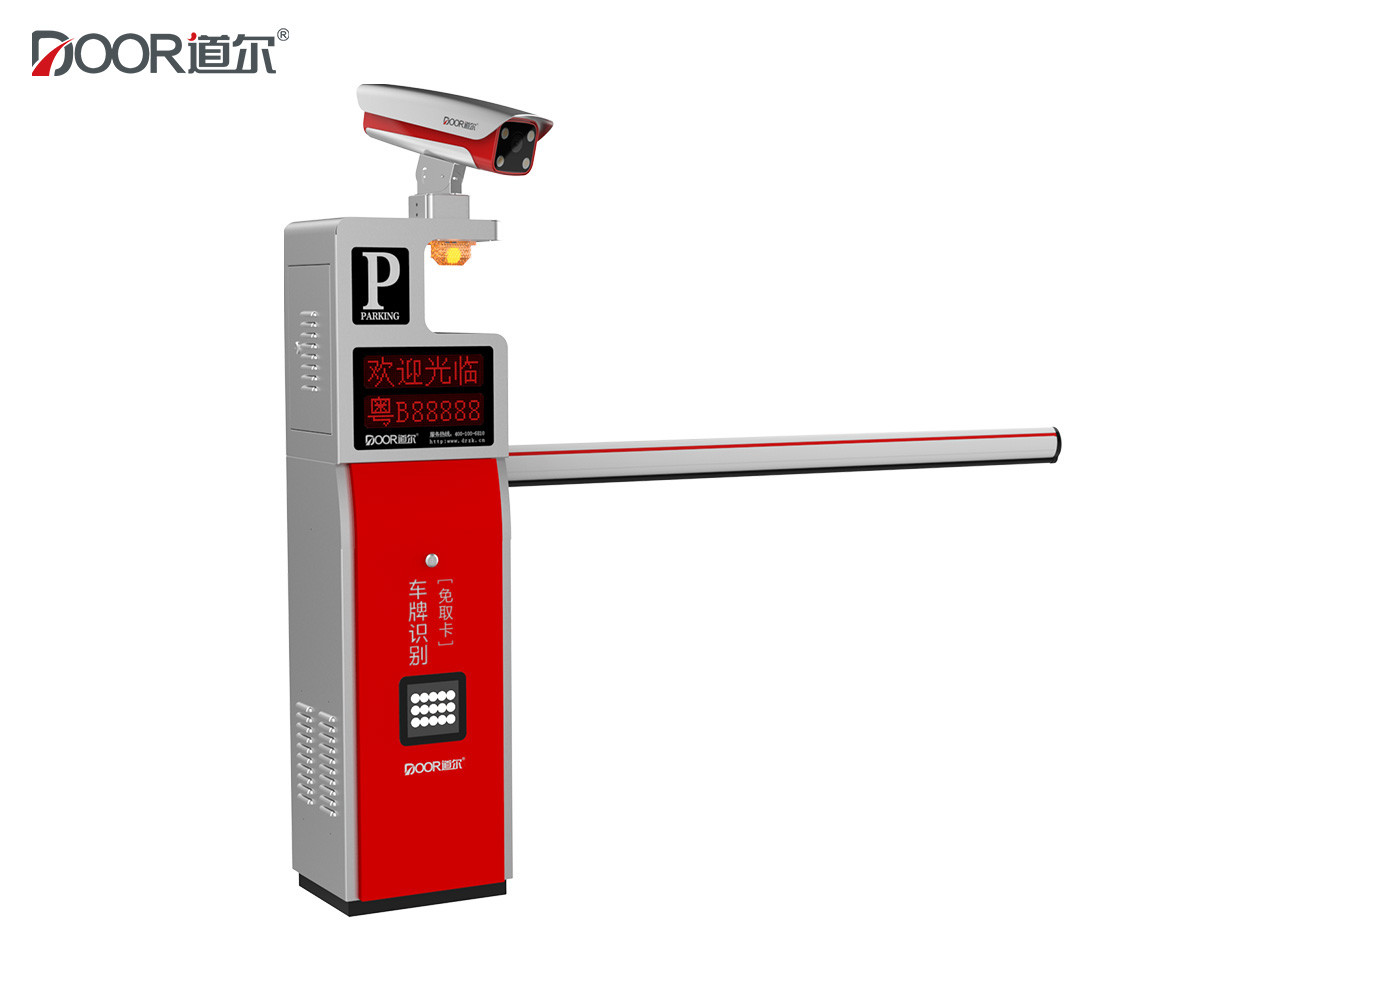 Stylish Appearance LPR Parking System Variety Of Payment Functions